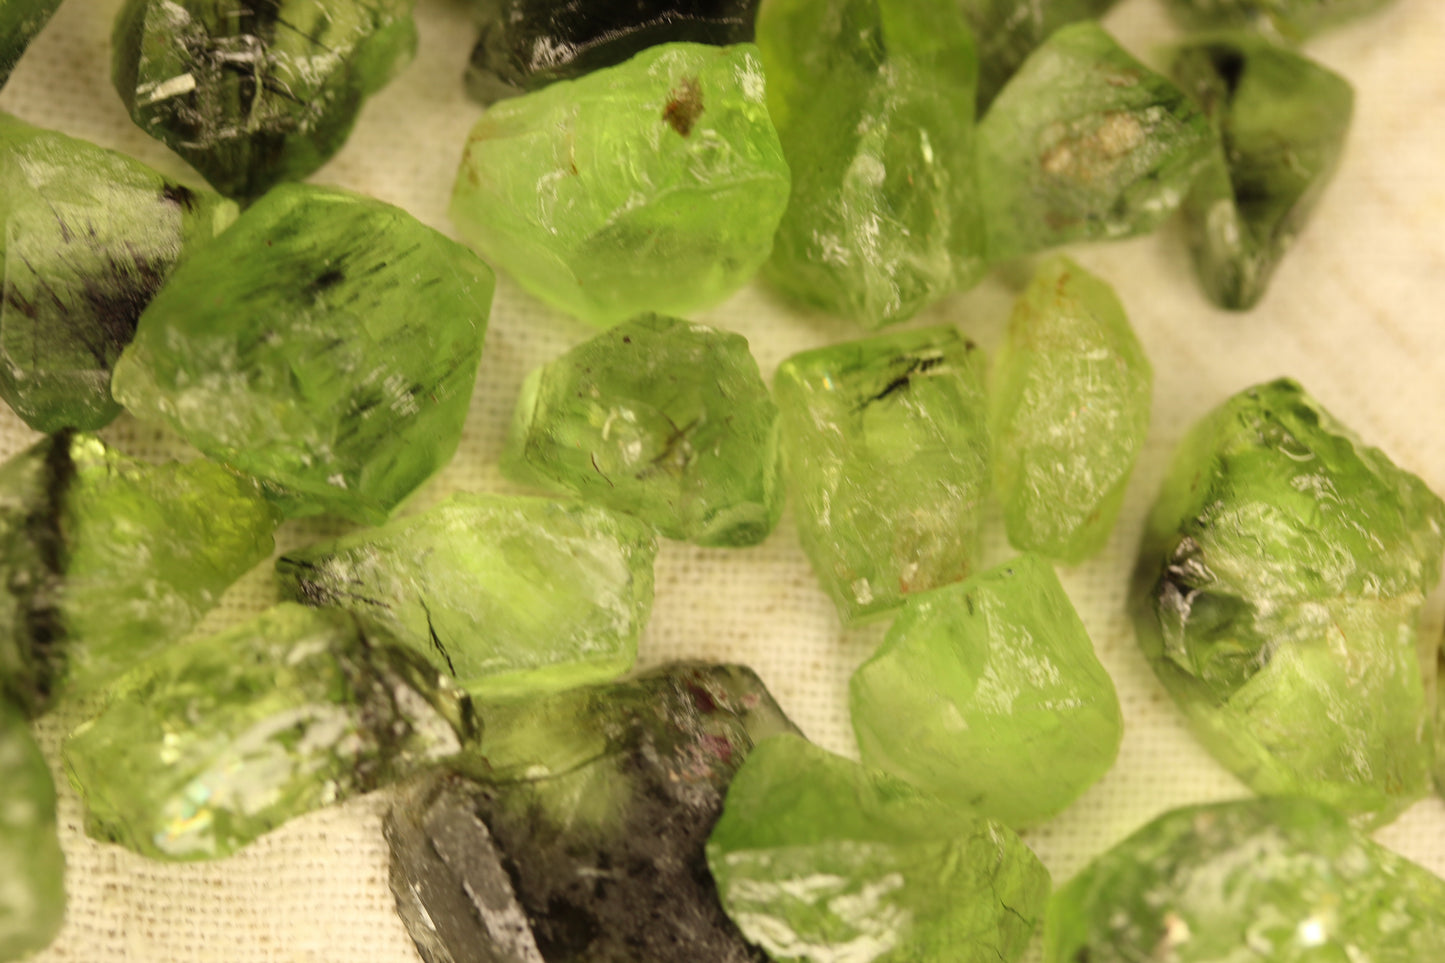 100 grams / 500 carats Natural Raw Peridots with Ludwigite Inclusions